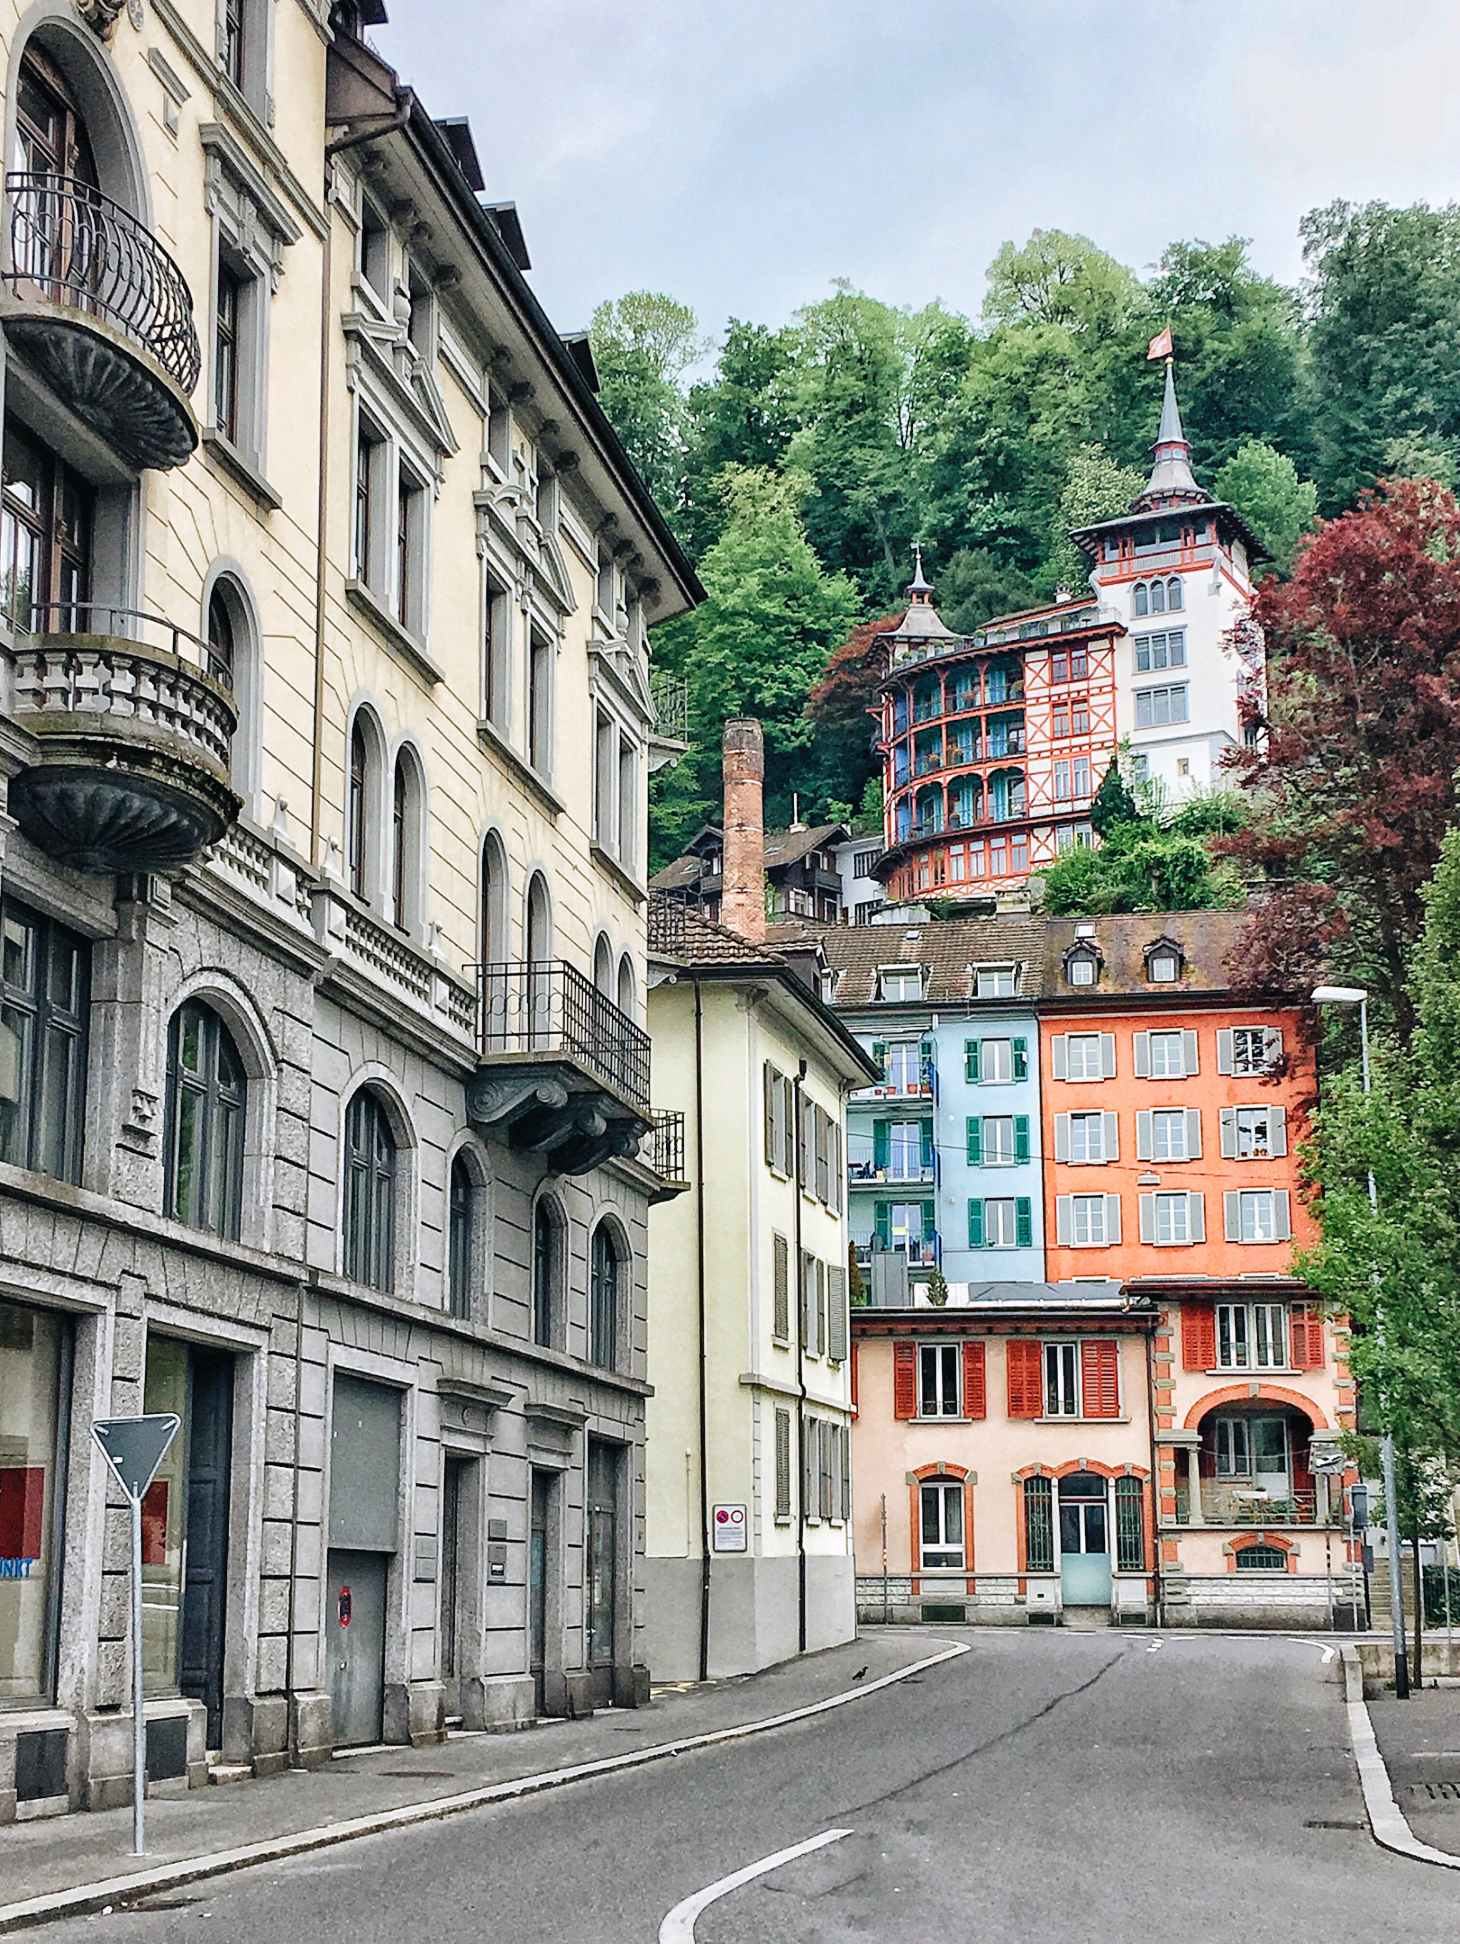 Charming architecture in Lucerne